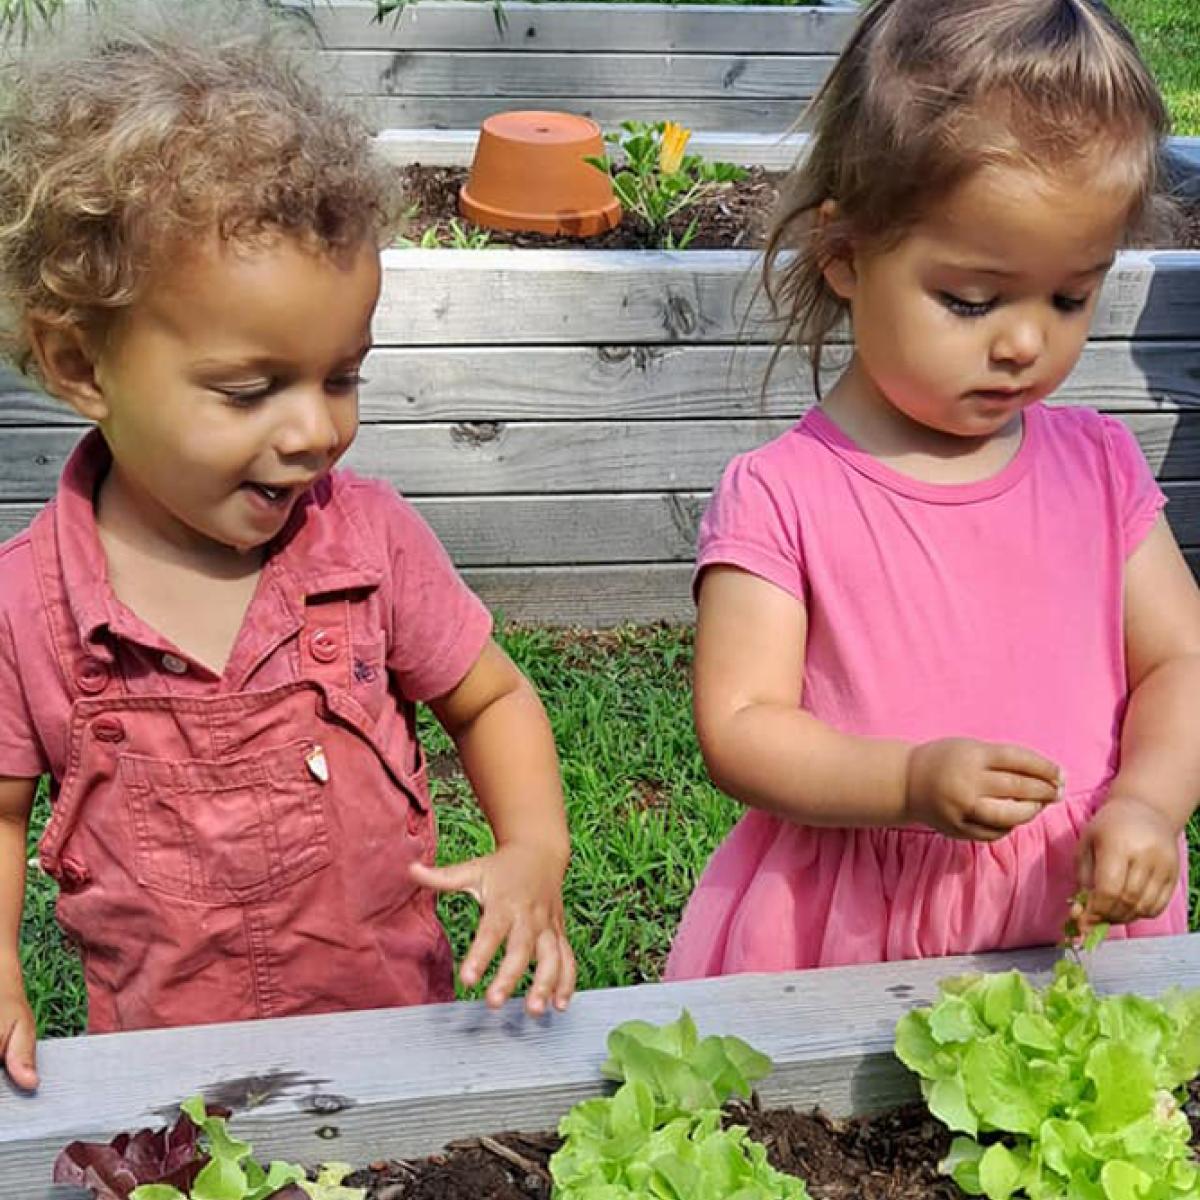 Two young children investigate a raised garden bed of newly planted lettuces at Milton Family Community Center.